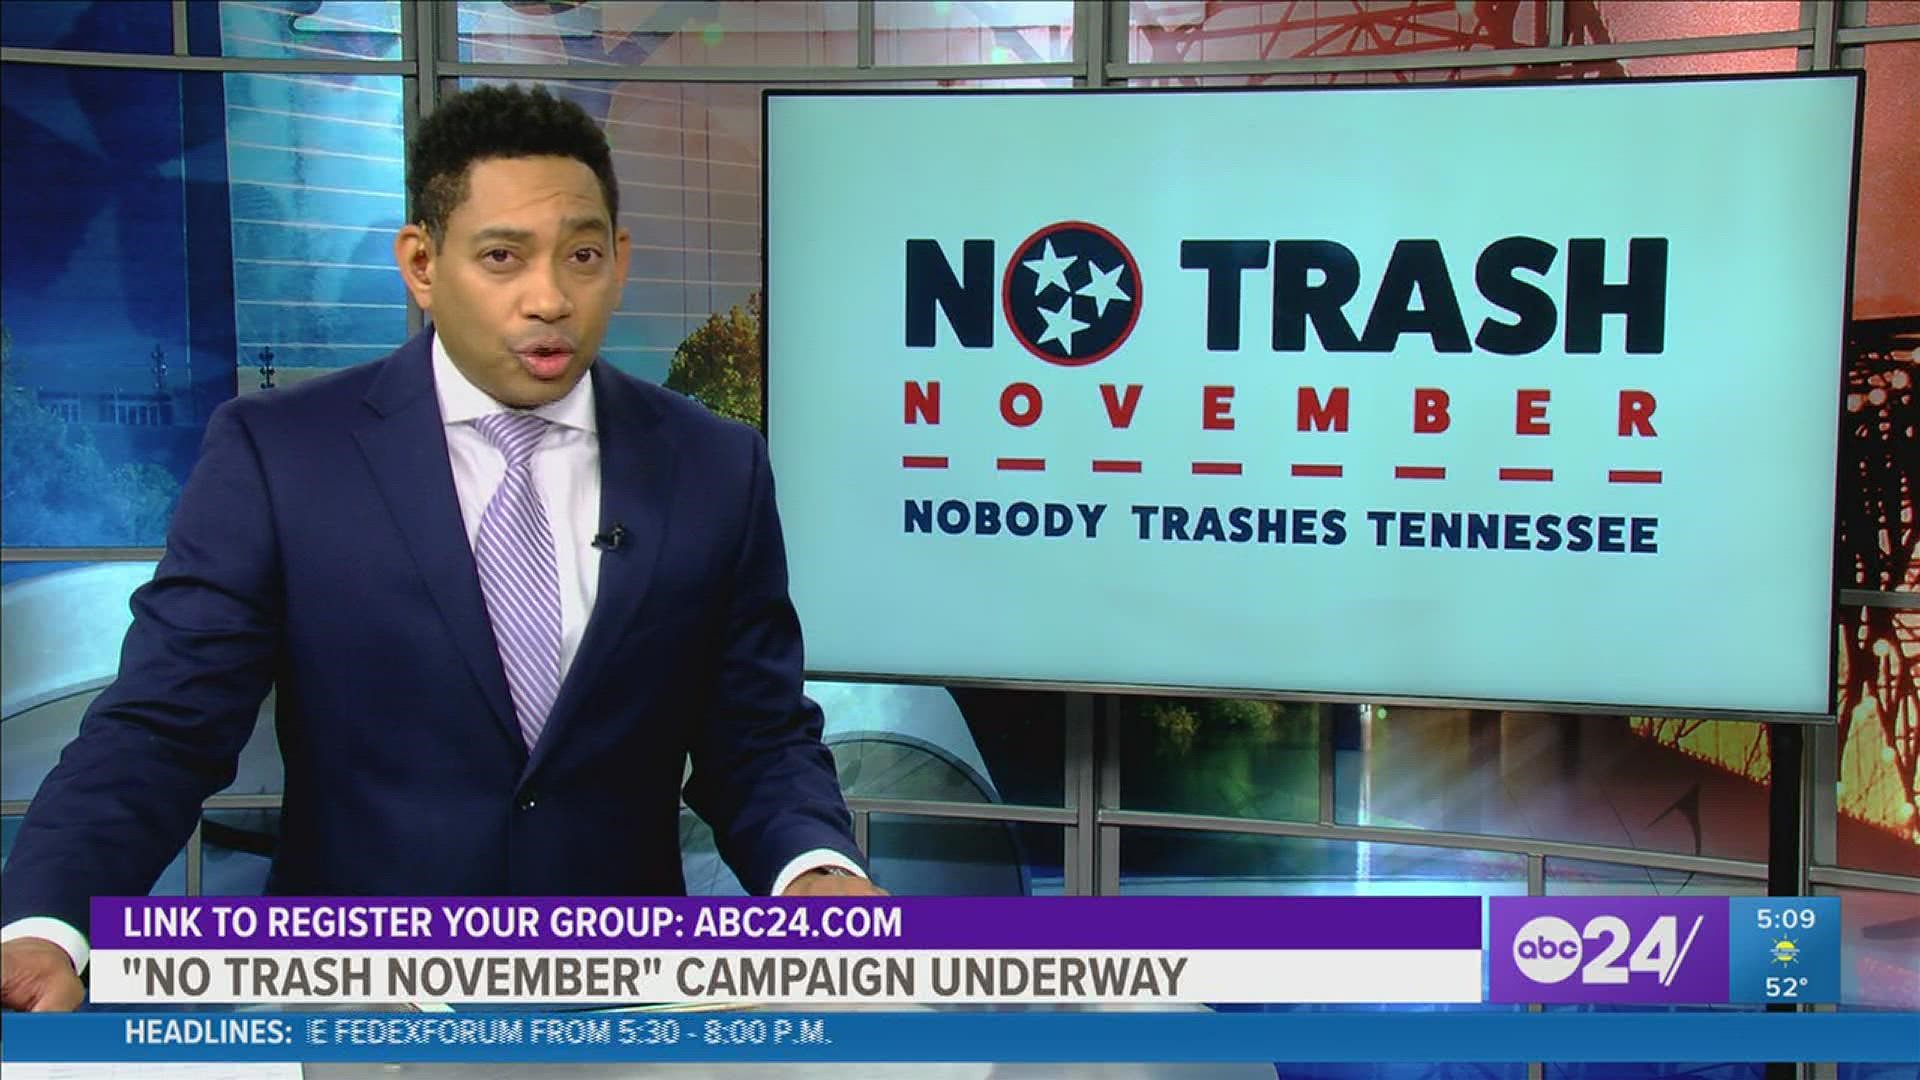 TDOT’s Nobody Trashes Tennessee has launched its statewide cleanup; partnering with Keep Tennessee Beautiful and Adopt-A-Highway groups